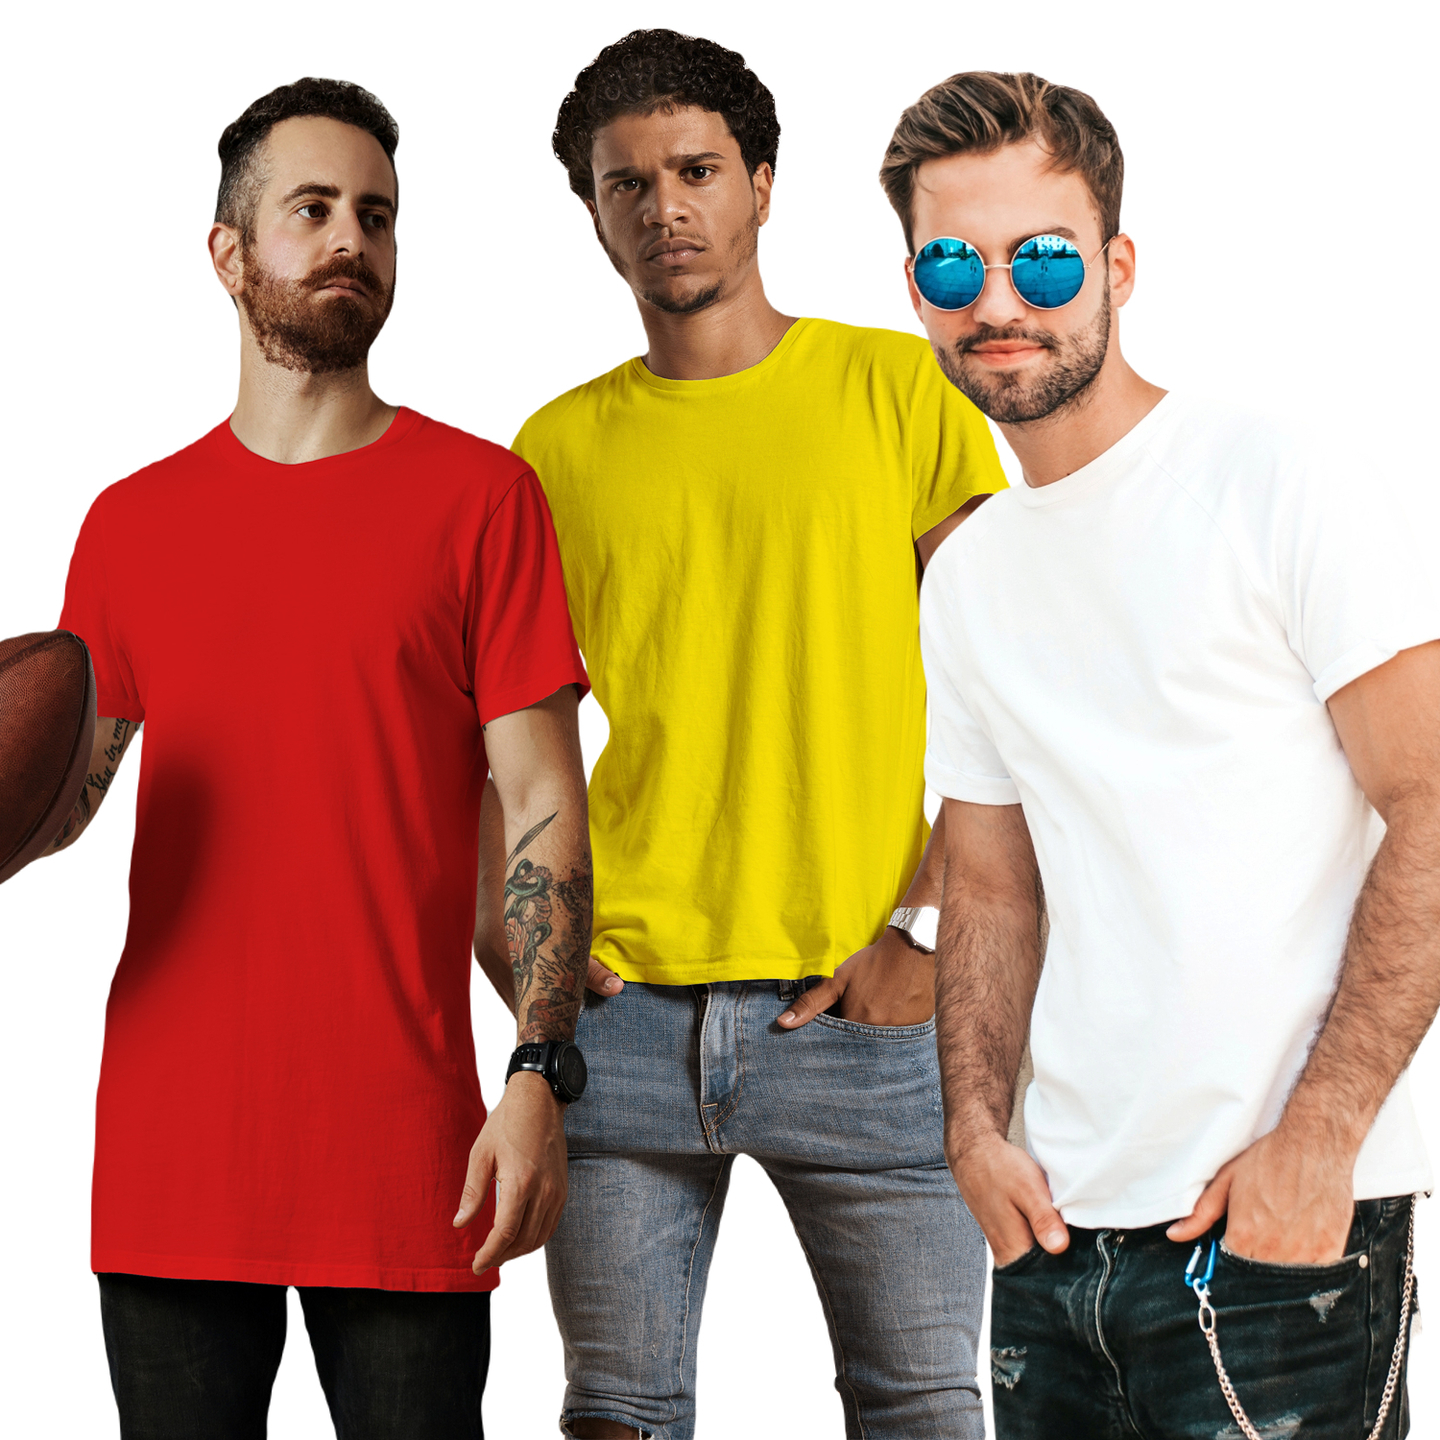 Wowsome Wish Tees - Your 3 - Professional Tees Combo - Red,Yellow,White